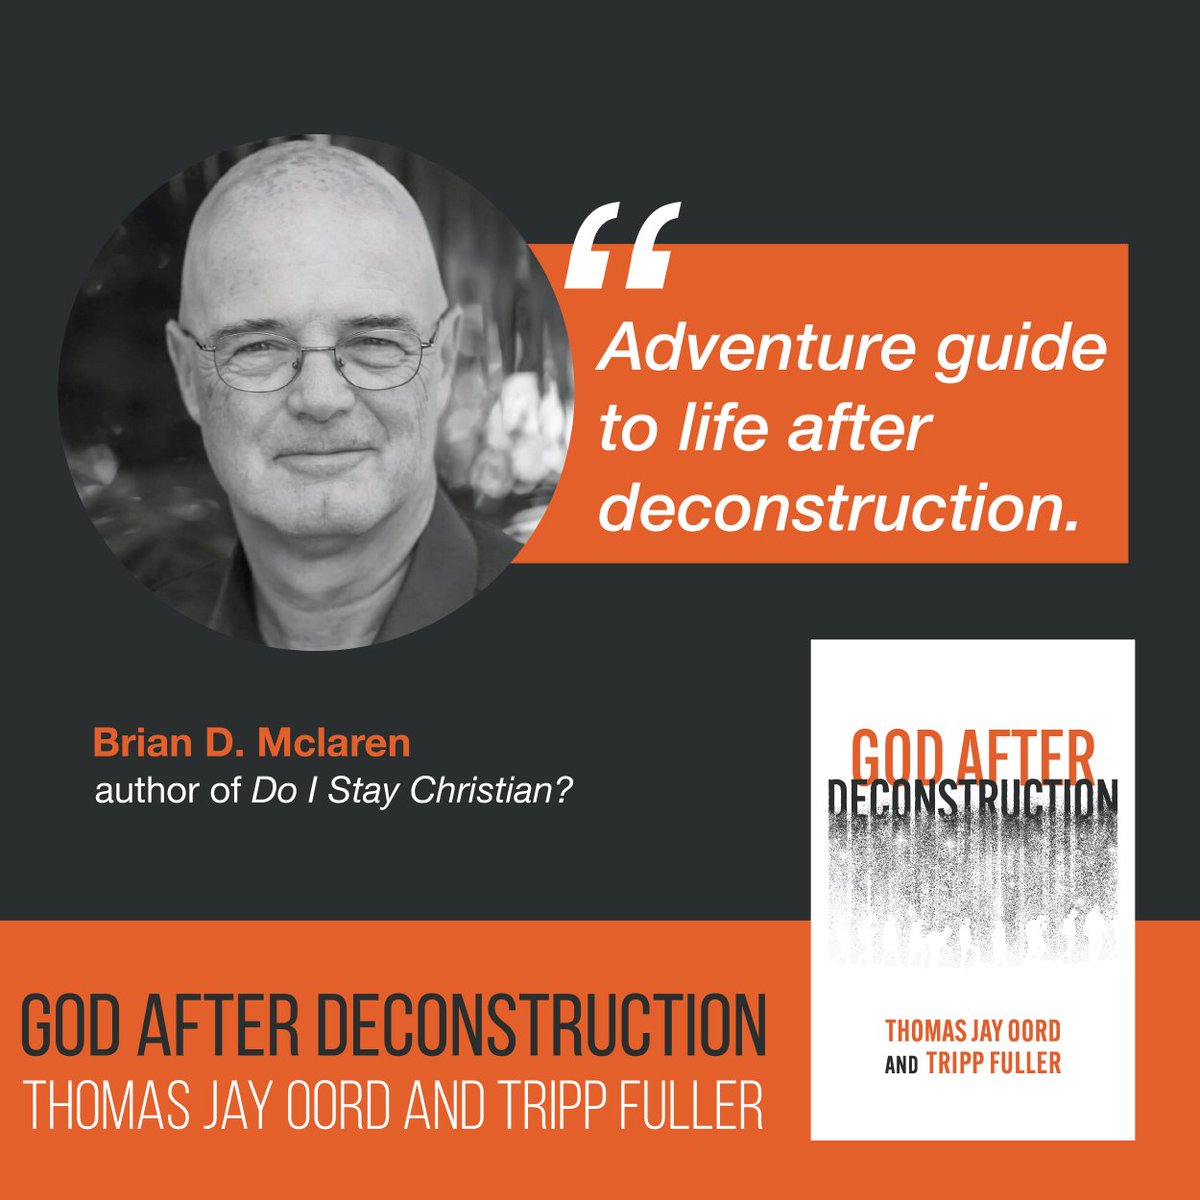 Tripp Fuller and I want to thank @brianmclaren for his kind endorsement of God After Deconstruction! We also wish Brian the very best with his own book, Life After Doom... amazon.com/God-After-Deco…